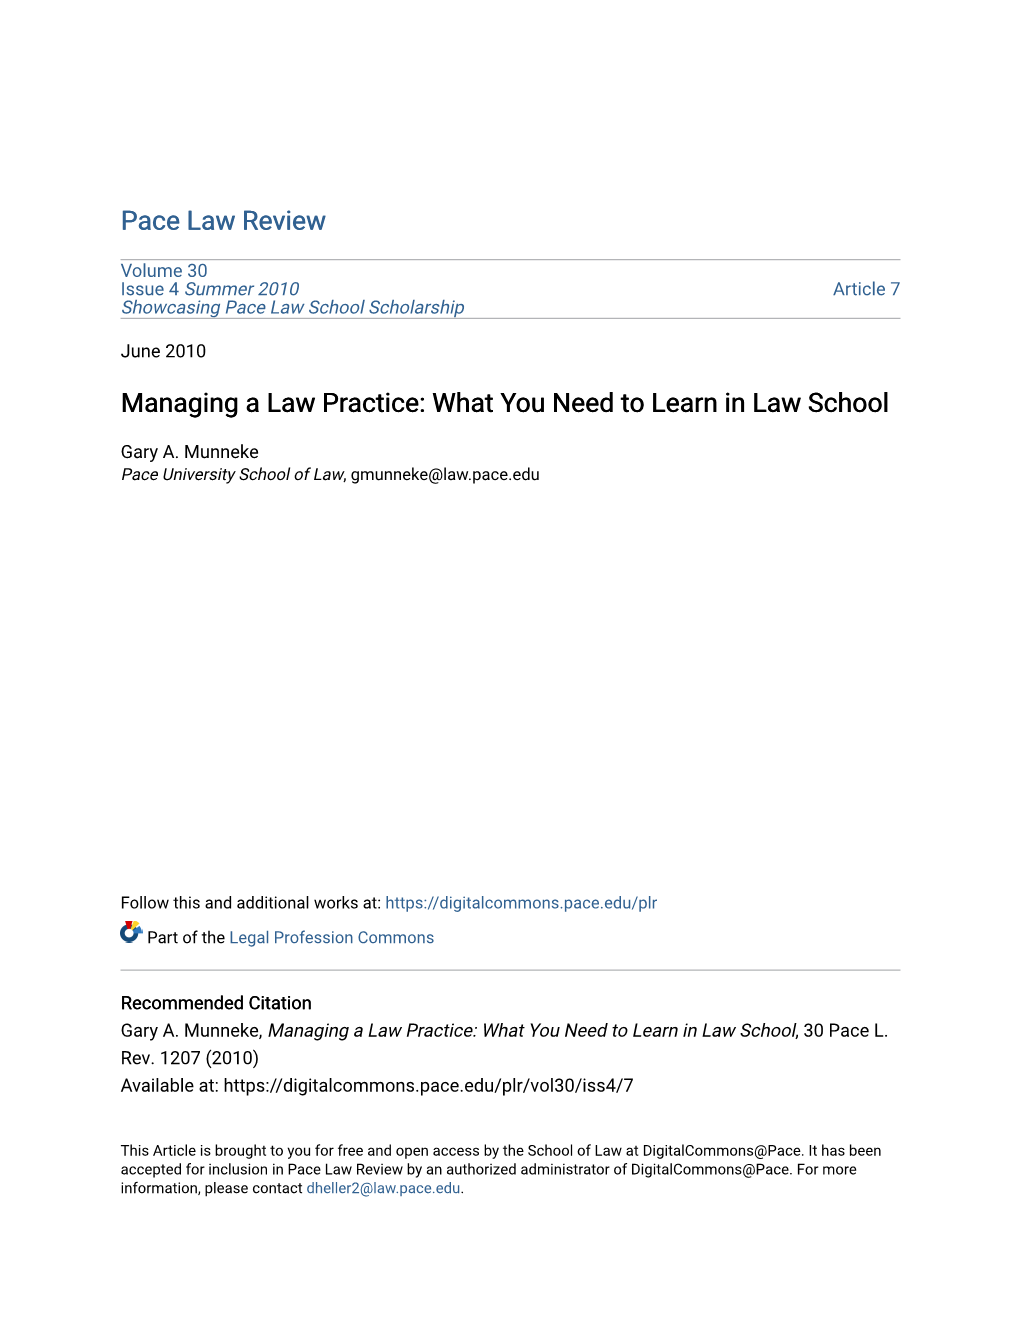 Managing a Law Practice: What You Need to Learn in Law School